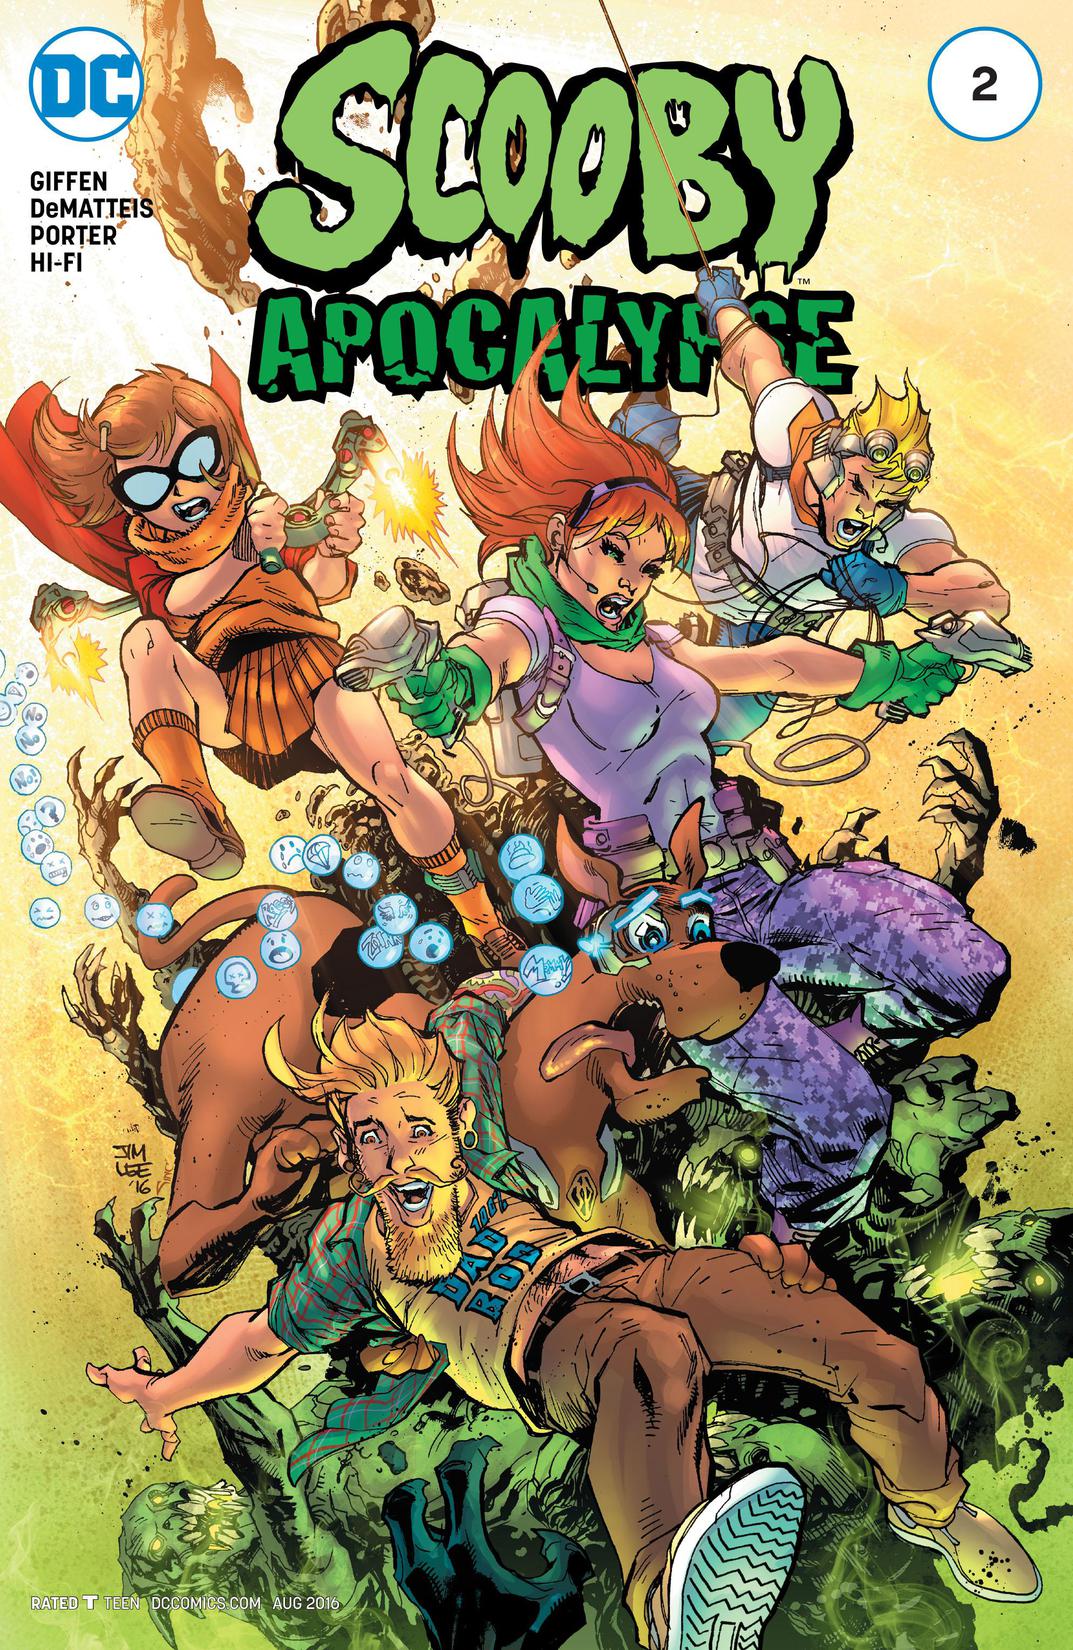 Scooby Apocalypse #2 preview images